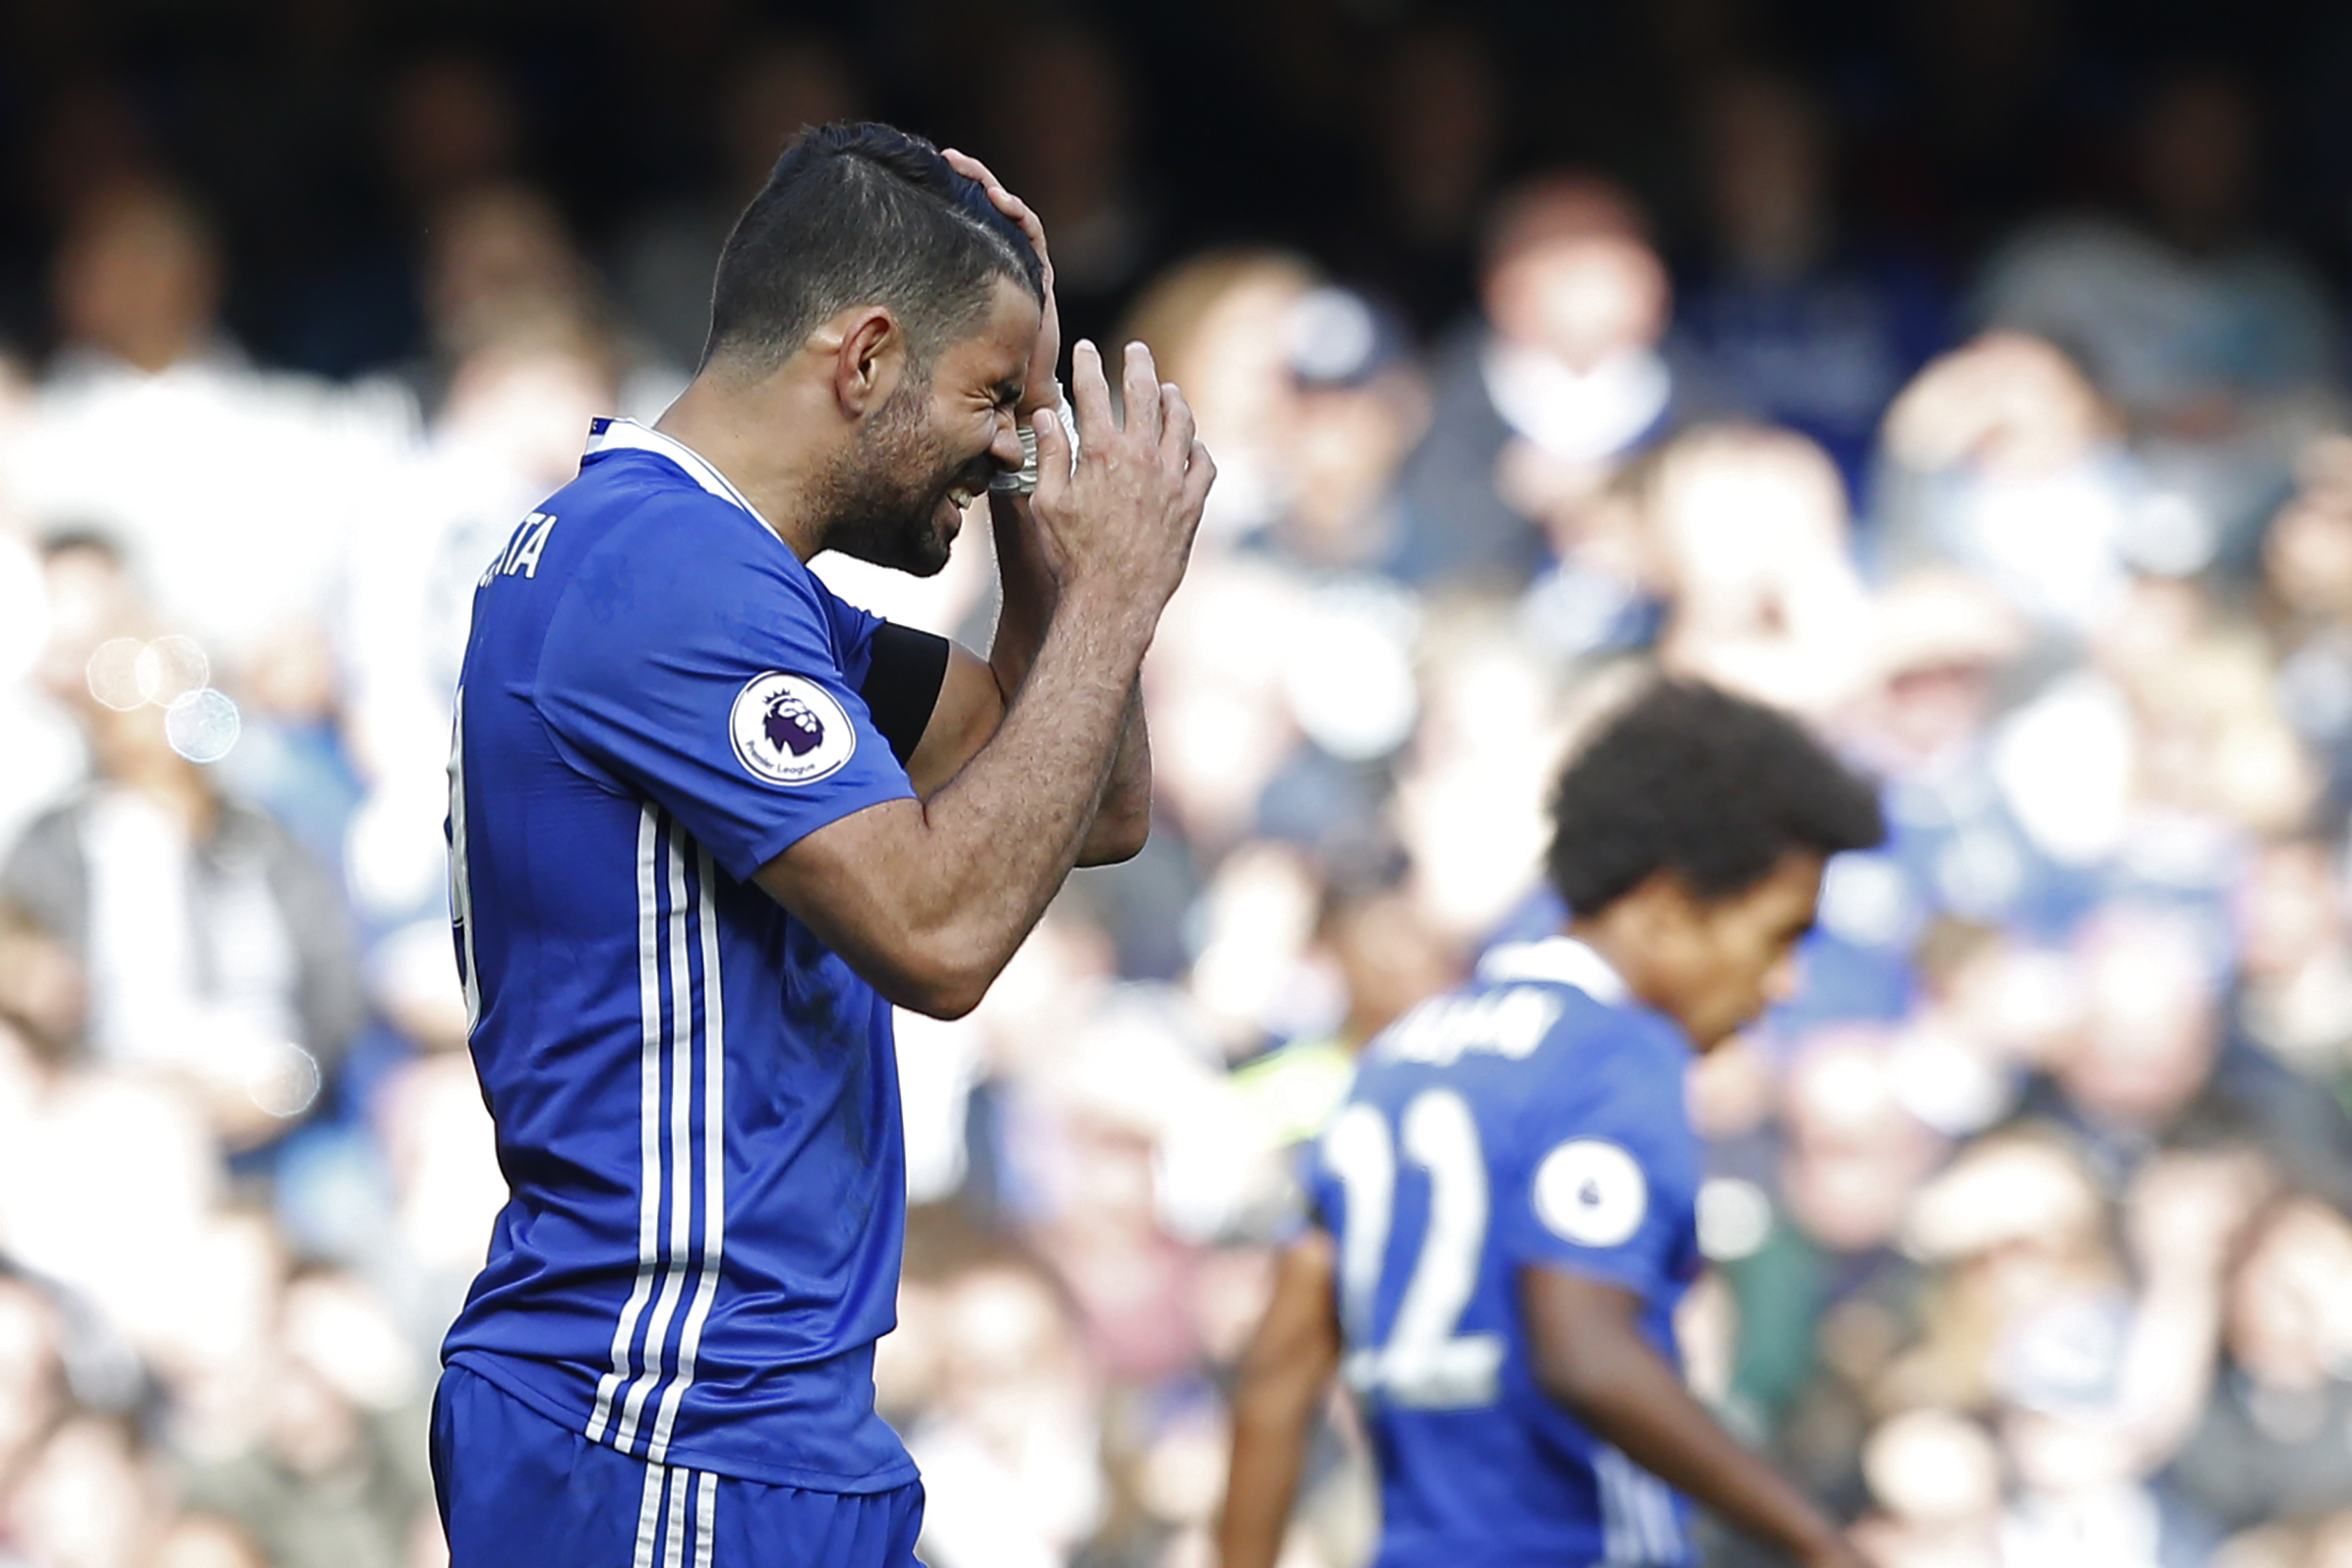 Chelsea's Brazilian-born Spanish striker Diego Costa reacts to missing a chance during the English Premier League football match between Chelsea and Crystal Palace at Stamford Bridge in London on April 1, 2017. / AFP PHOTO / Ian KINGTON / RESTRICTED TO EDITORIAL USE. No use with unauthorized audio, video, data, fixture lists, club/league logos or 'live' services. Online in-match use limited to 75 images, no video emulation. No use in betting, games or single club/league/player publications.  /         (Photo credit should read IAN KINGTON/AFP/Getty Images)